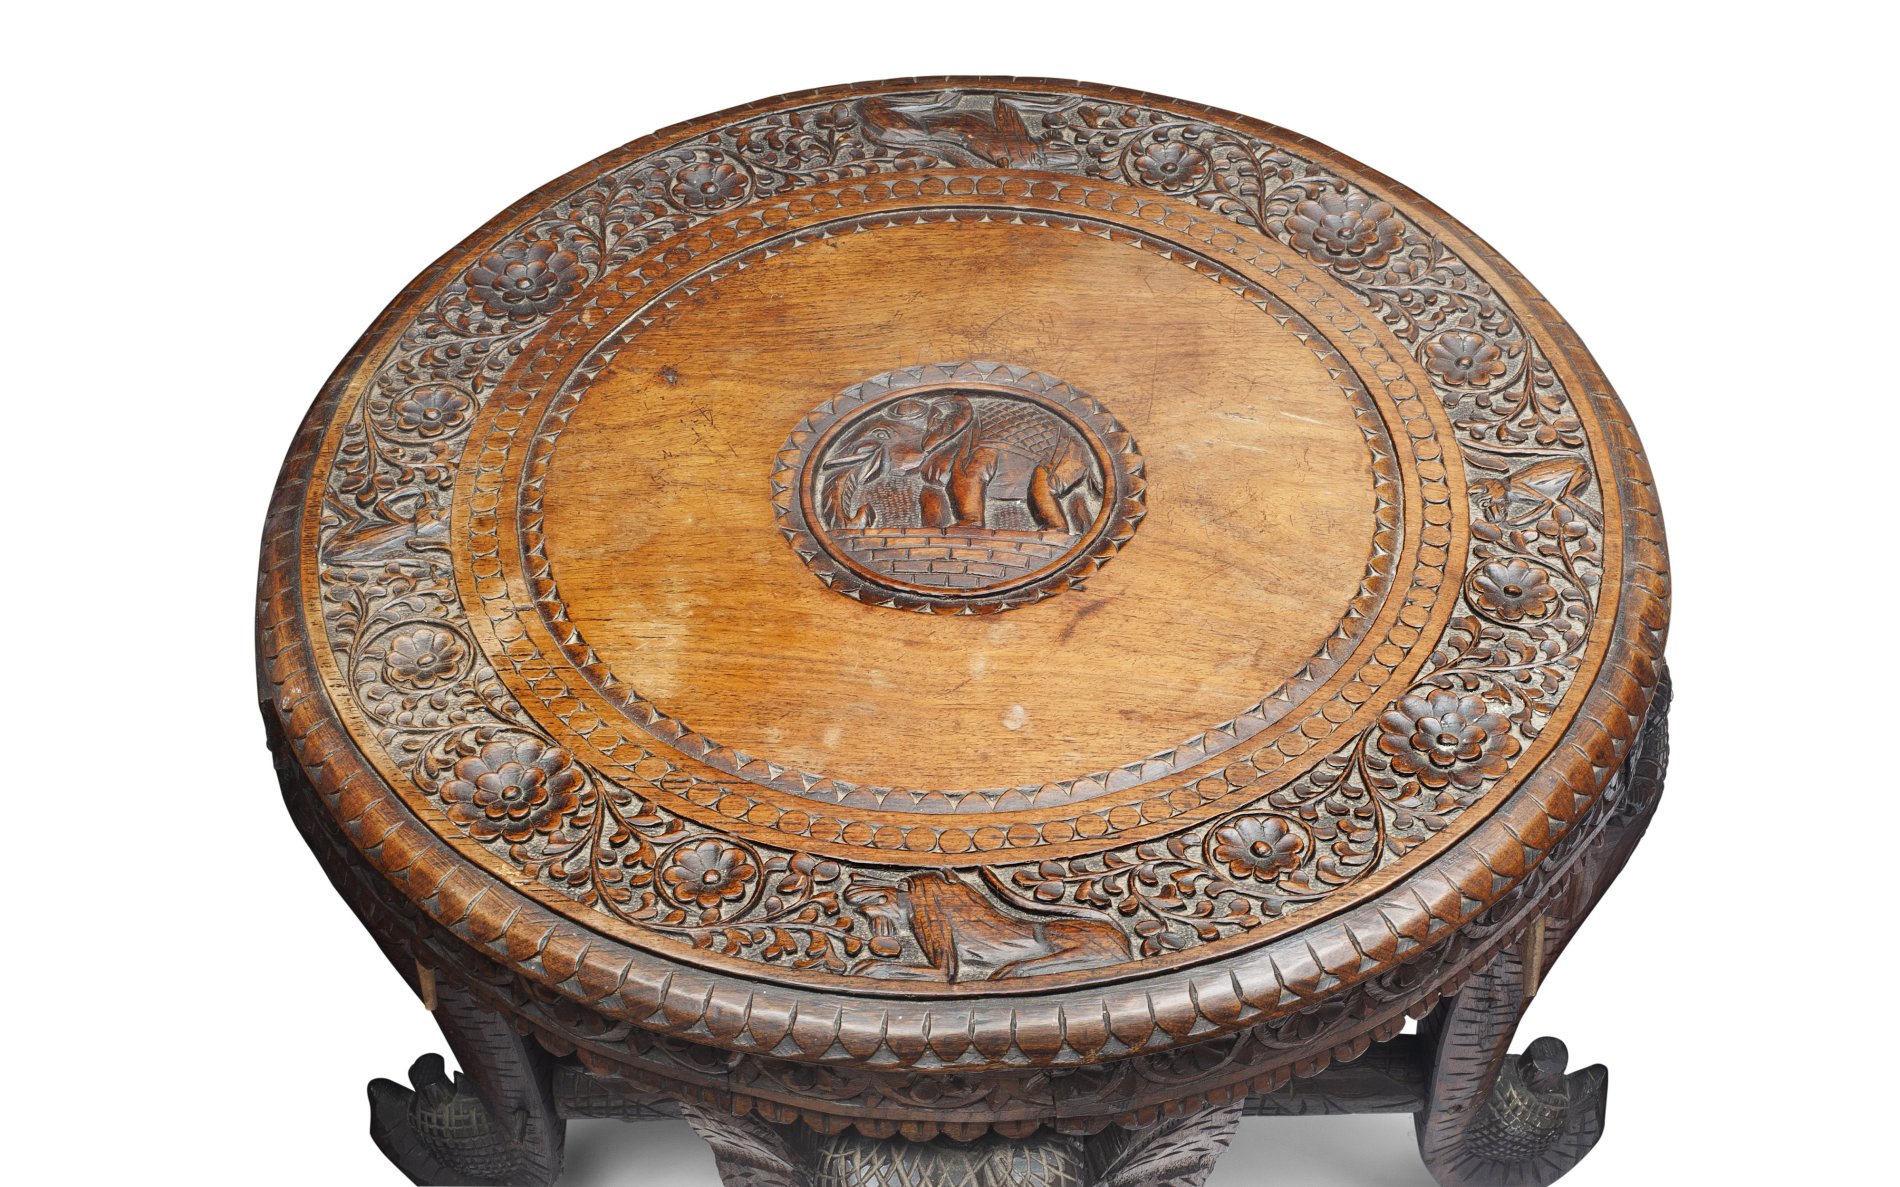 AN EARLY 20TH CENTURY INDIAN CARVED WOOD TABLE OF ELEPHANT THEME - Image 4 of 4